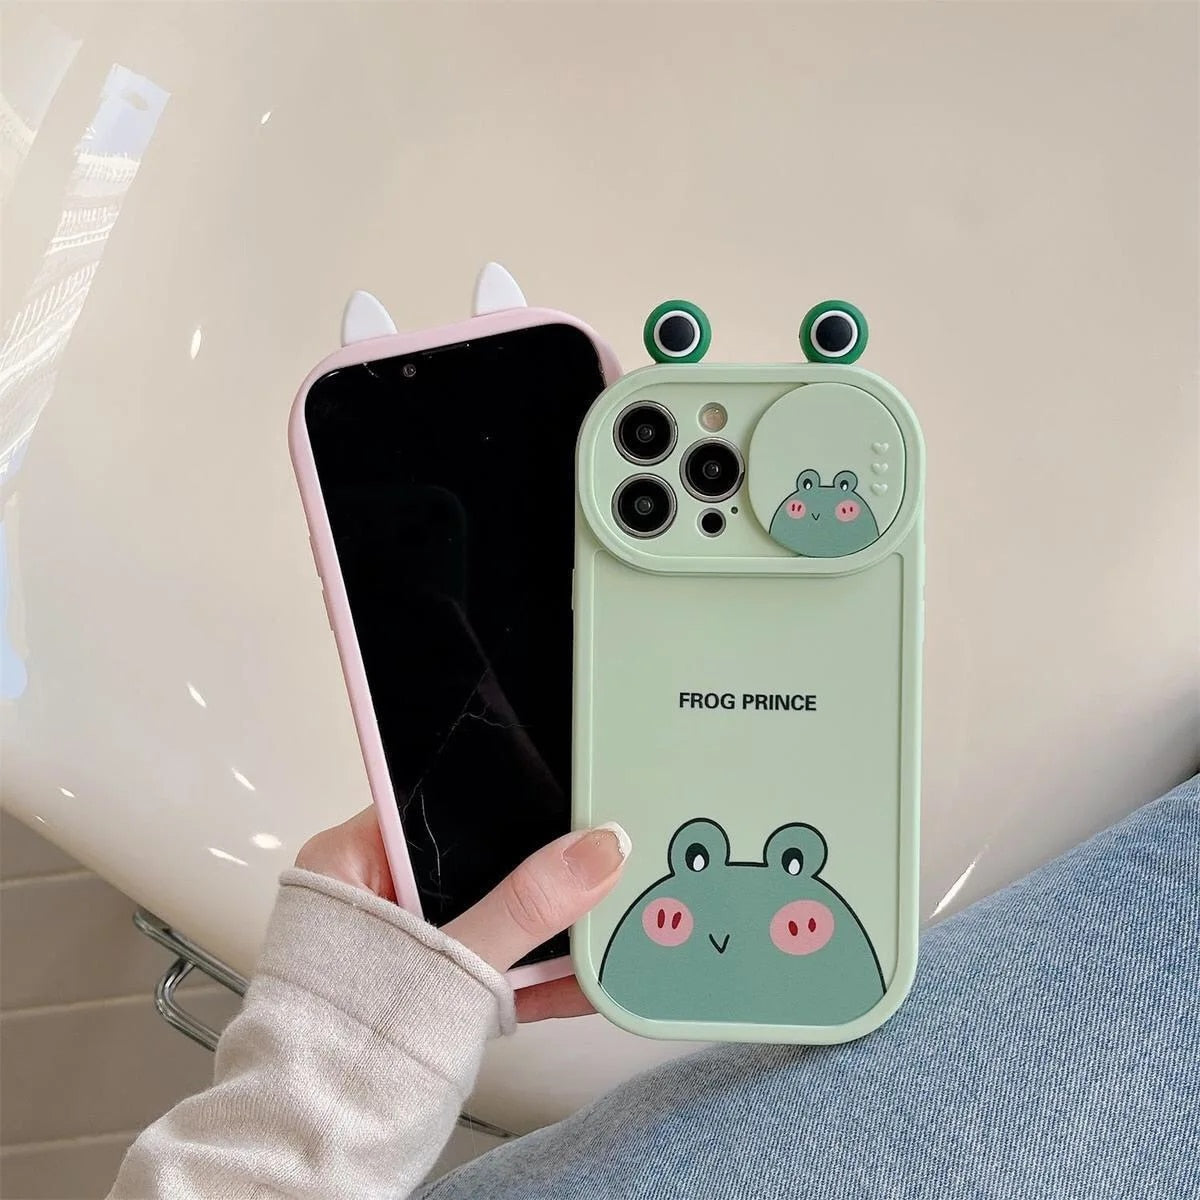 Cartoon Eyes Design with a Sliding Camera feature, crafted in a Soft TPU